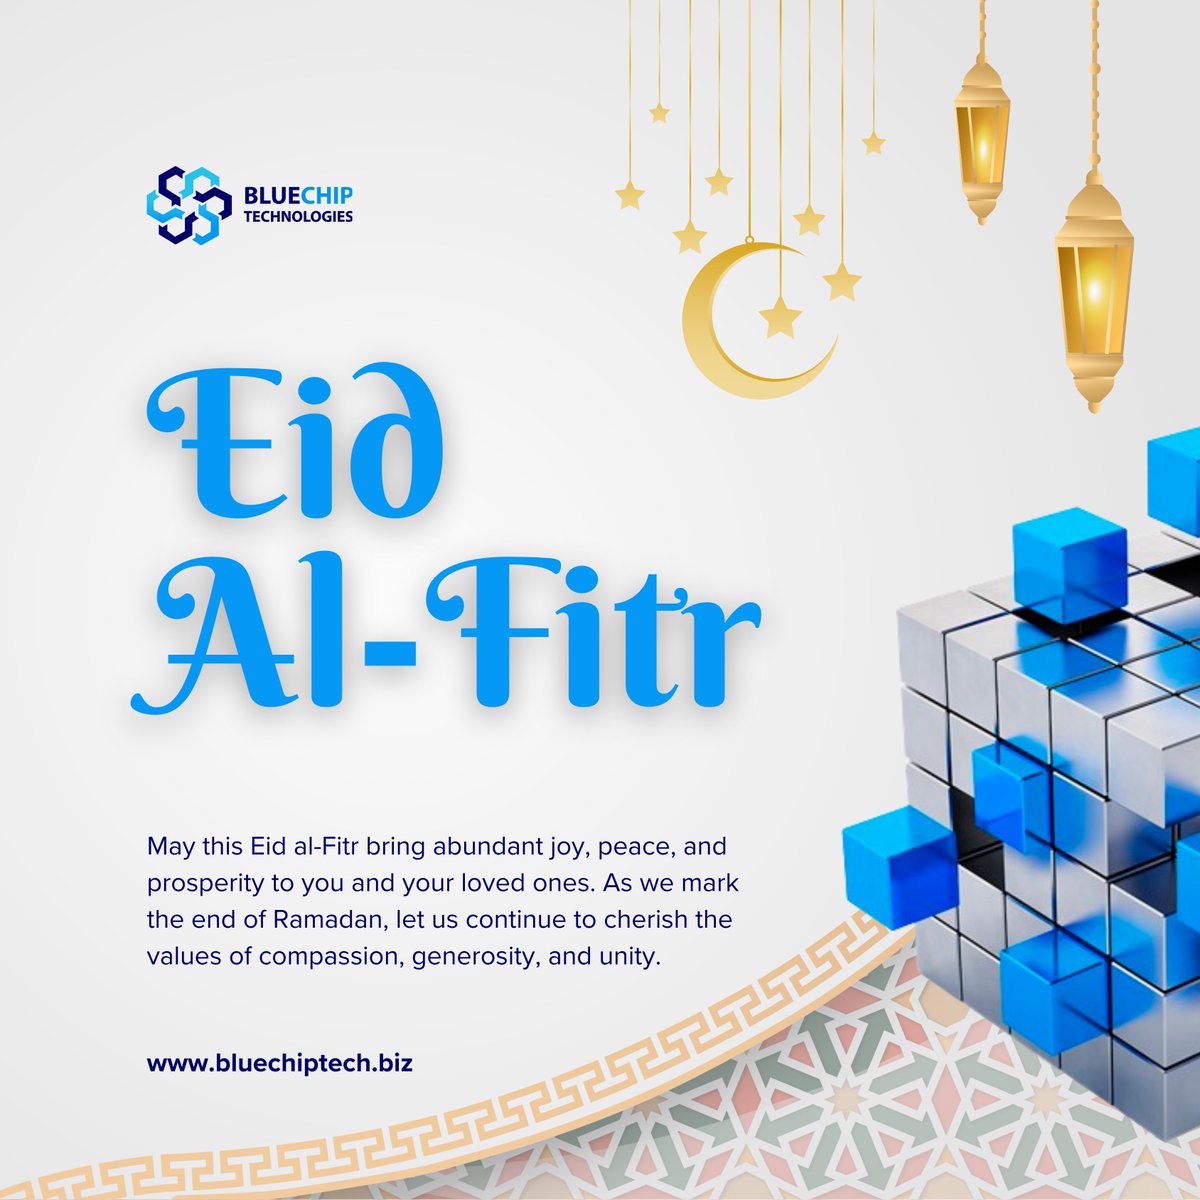 Happy Eid al-Fitr from Bluechip Technologies! Wishing you all a joyful Eid al-Fitr filled with blessings, happiness, and togetherness. #EidMubarak #BluechipTechnologies #Celebration